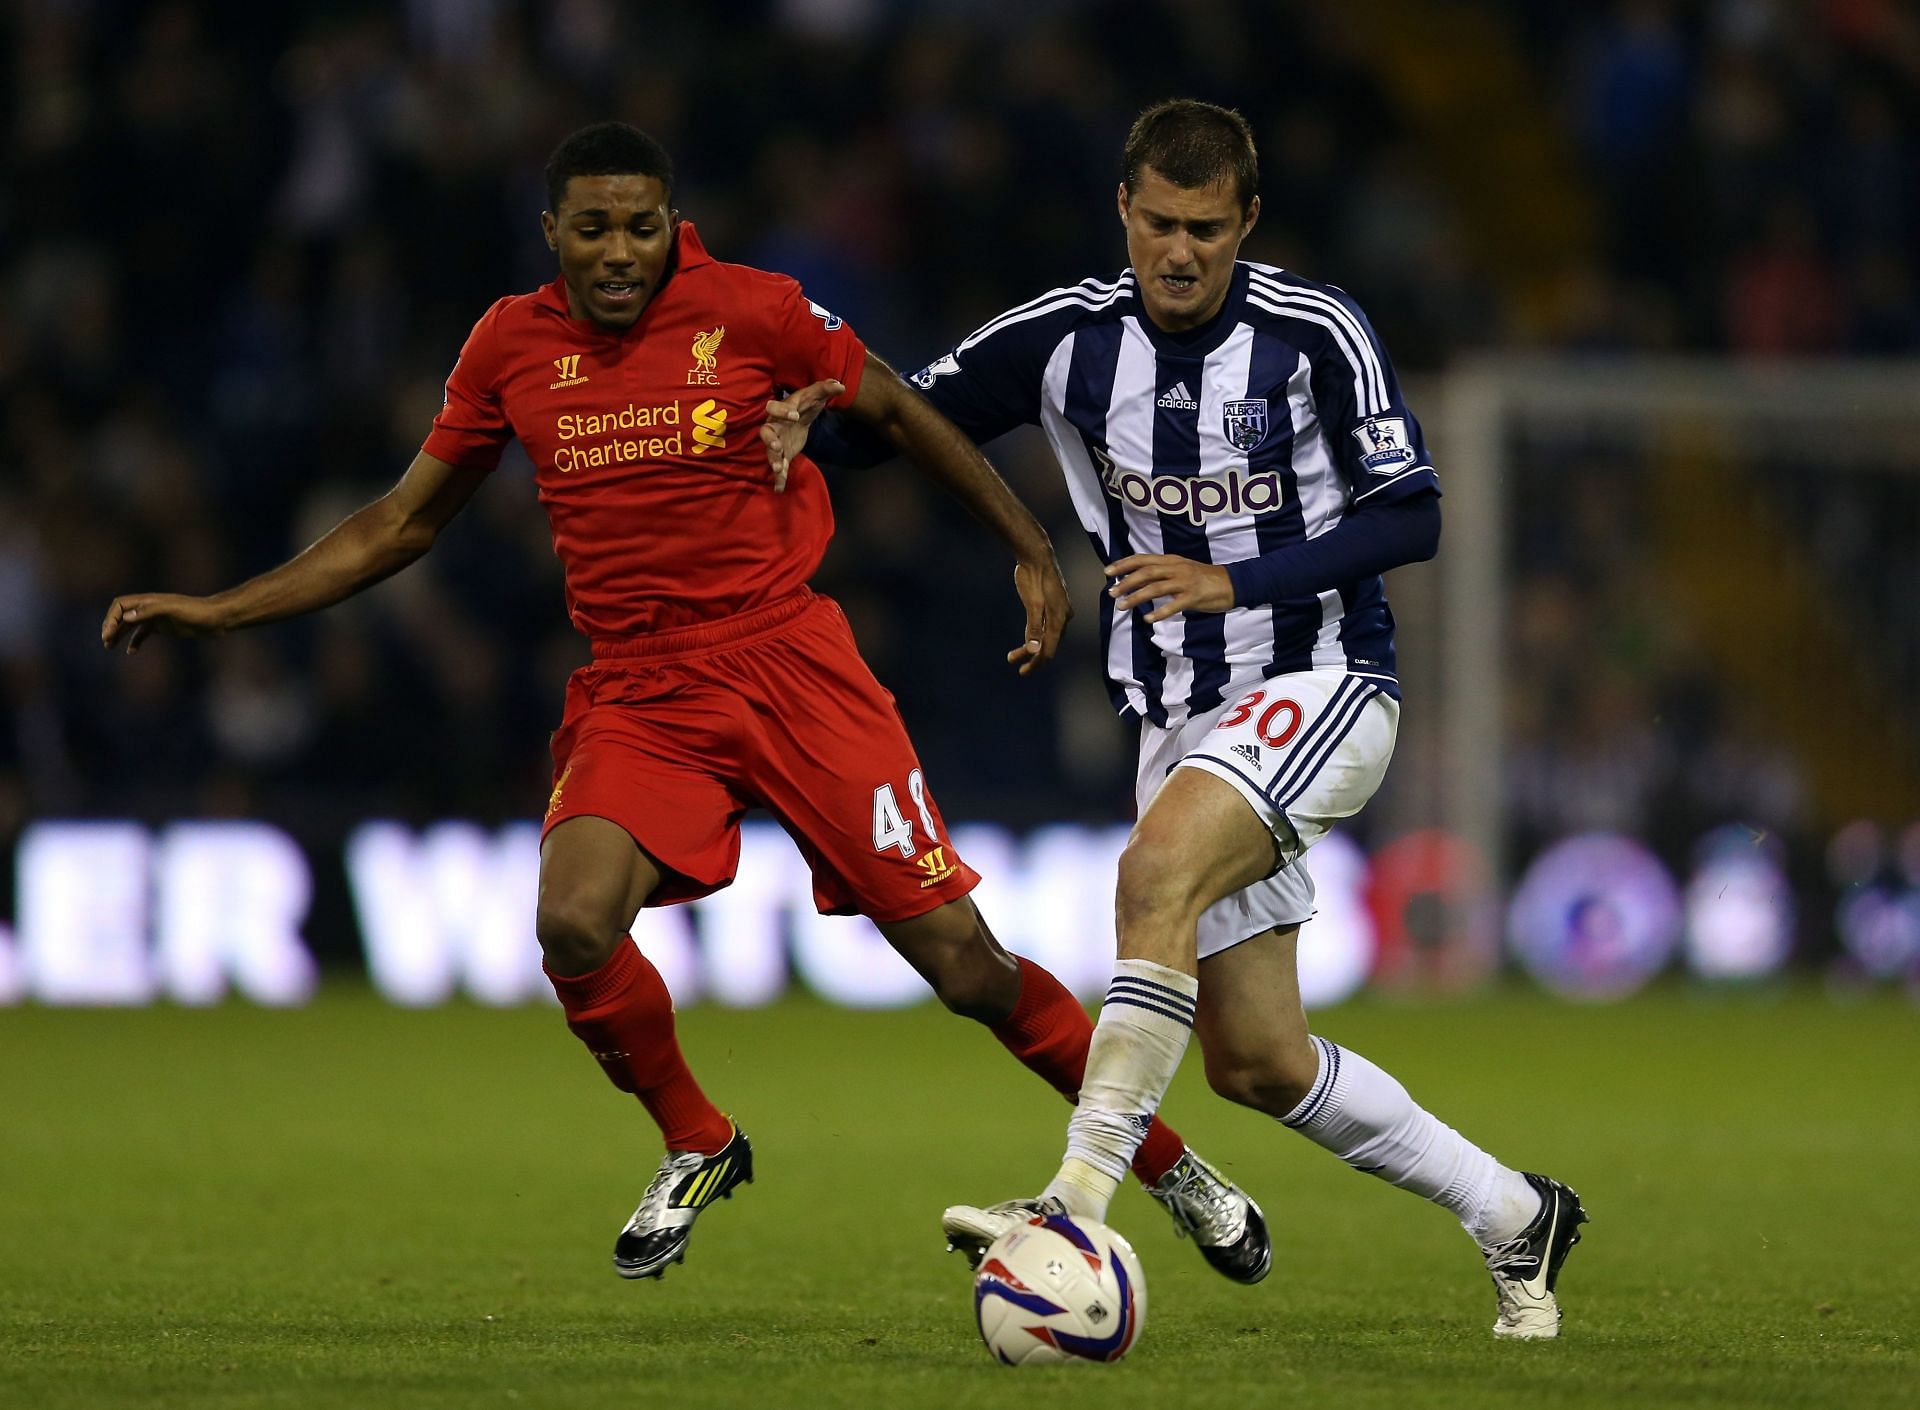 Jerome Sinclair drew comparisons from another club prodigy, Raheem Sterling